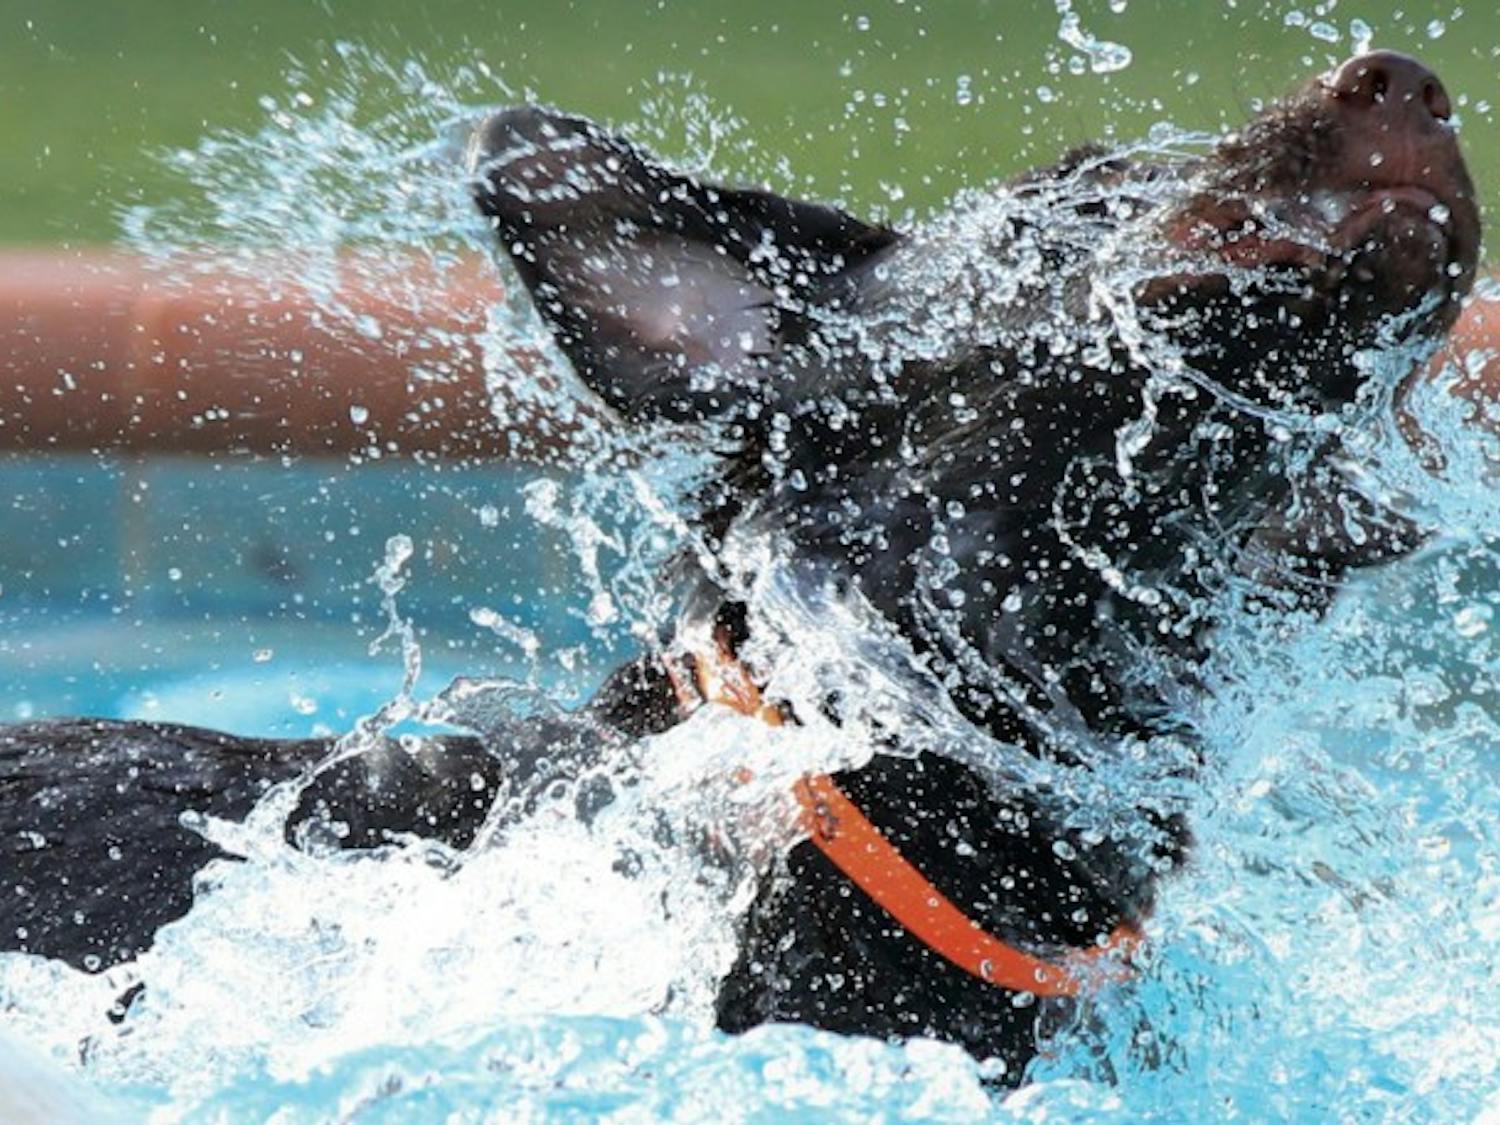 Bean, a 6-month-old chocolate Labrador retriever, shakes water off while at Pet Paradise Resort Wednesday. The dog resort and spa hosts a Wacky Wednesday once a week until Oct. 31, when employees dress to follow a theme and almost all pet services are discounted.